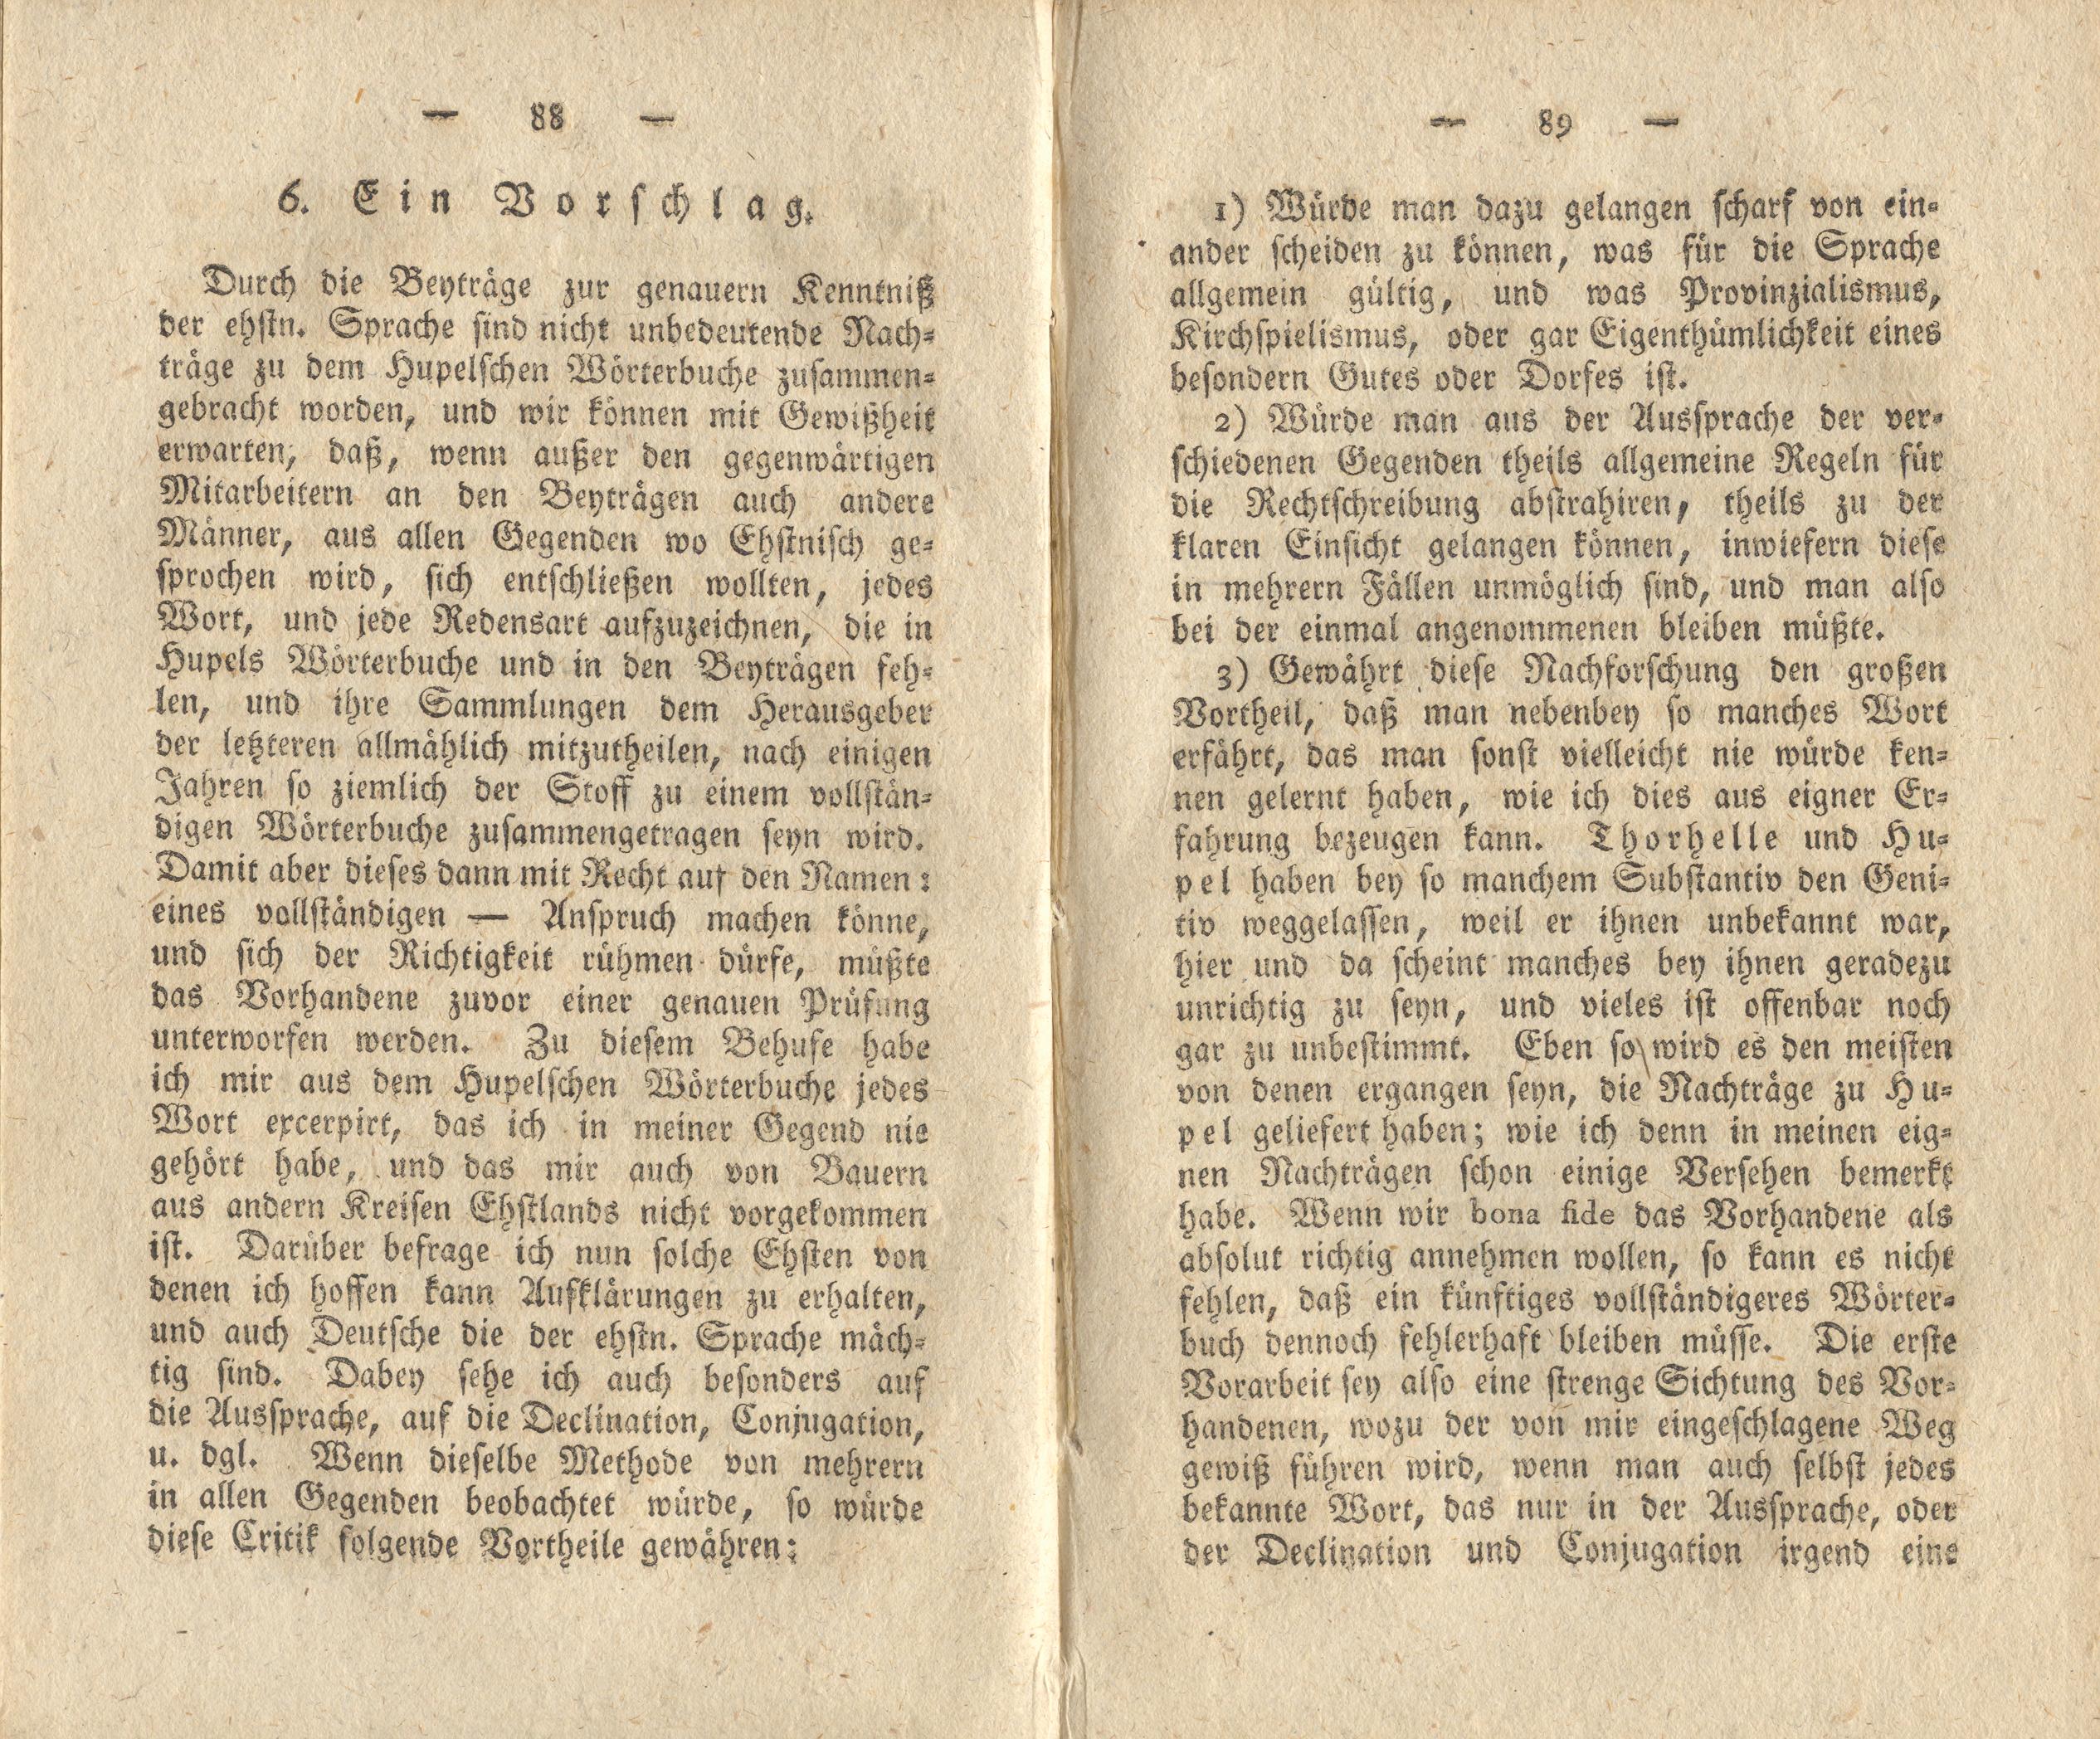 Beiträge [12] (1818) | 45. (88-89) Main body of text